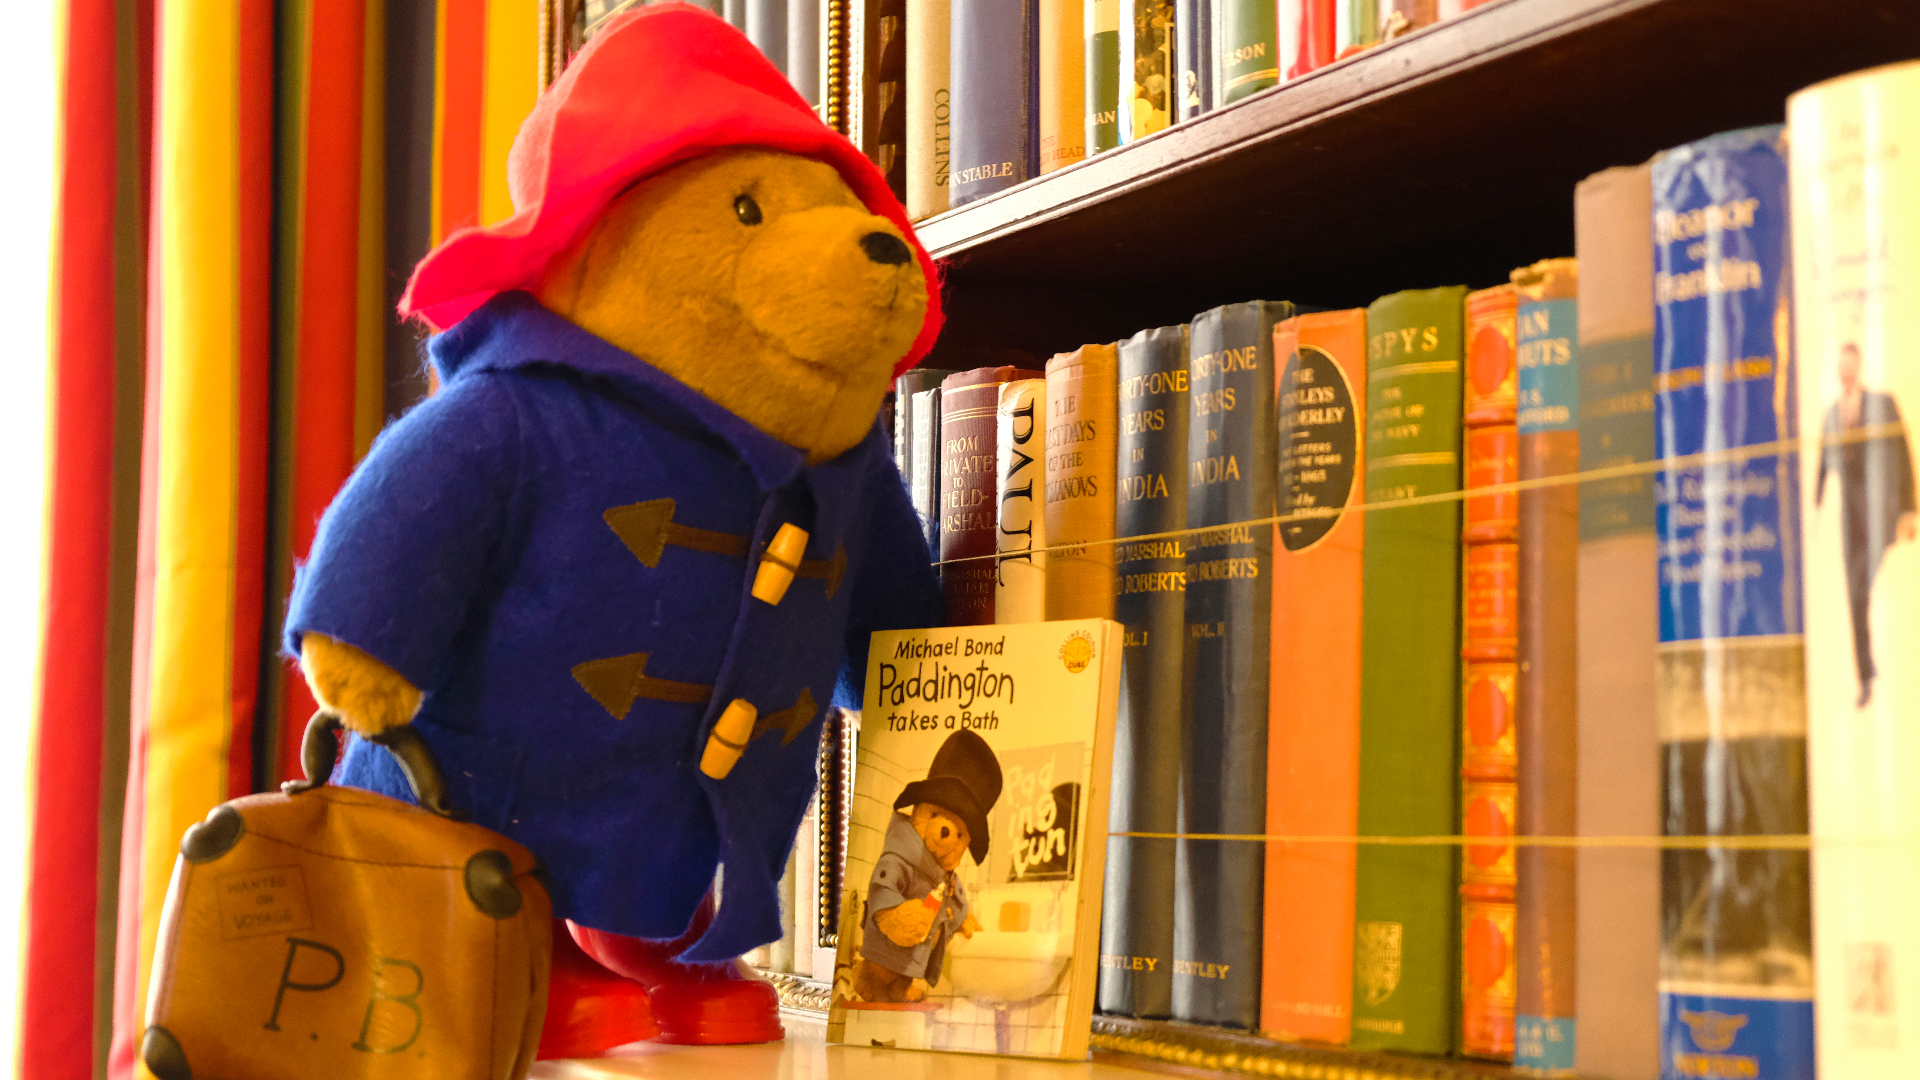 The Paddingtons are being looked after at the royal residences.